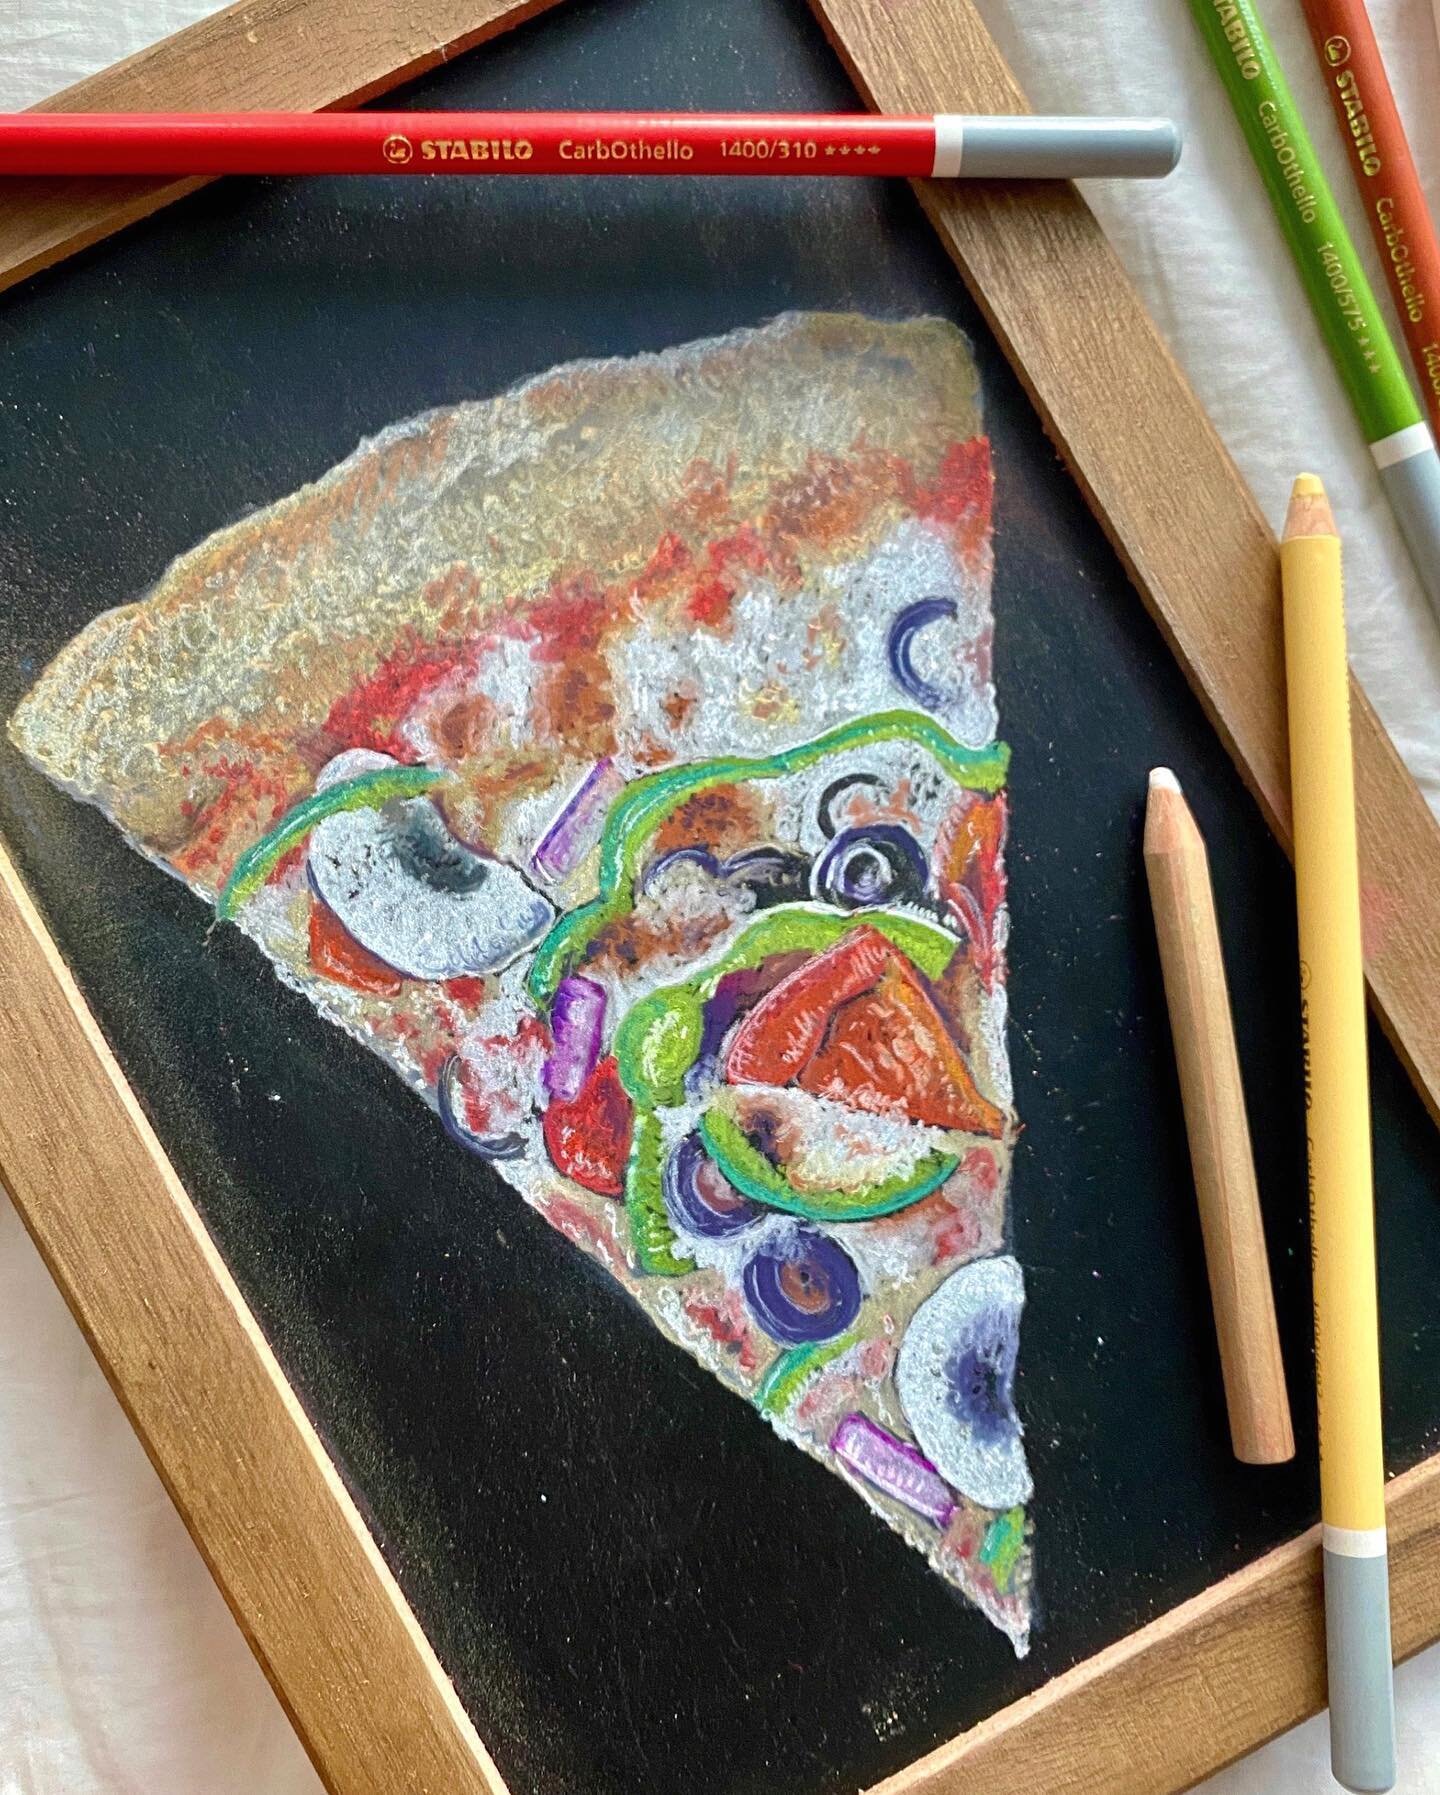 Fridays are for pizza 🍕
&bull;
&bull;
A sketch created for a new client that I ended up enjoying way too much. Food drawings are are my favorite!
&bull;
&bull;
&bull;
#jnchalkandco #chalkartist #chalkpencils #Stabilo #CarbOthello #pastelpencils #piz